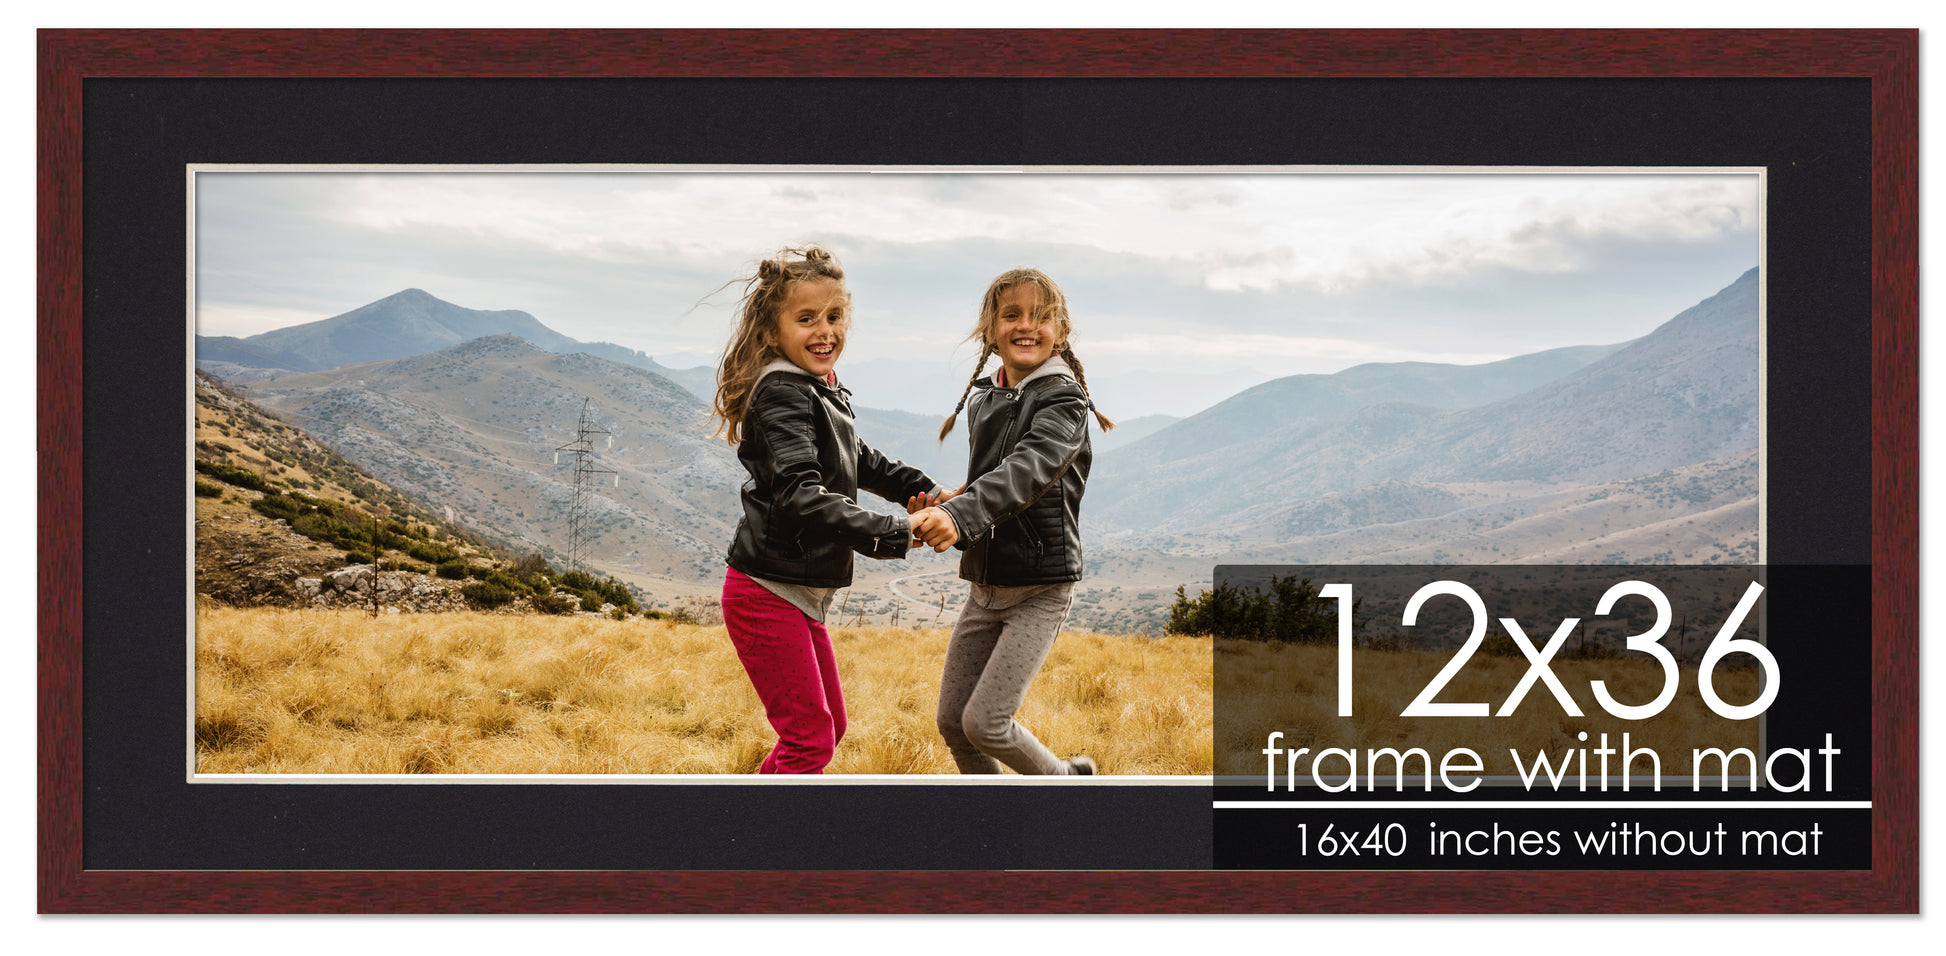 White 4x4 Frame With Mat - 8x8 Frame For a 4 x 4 Photo - Great for  Instagram Pictures 